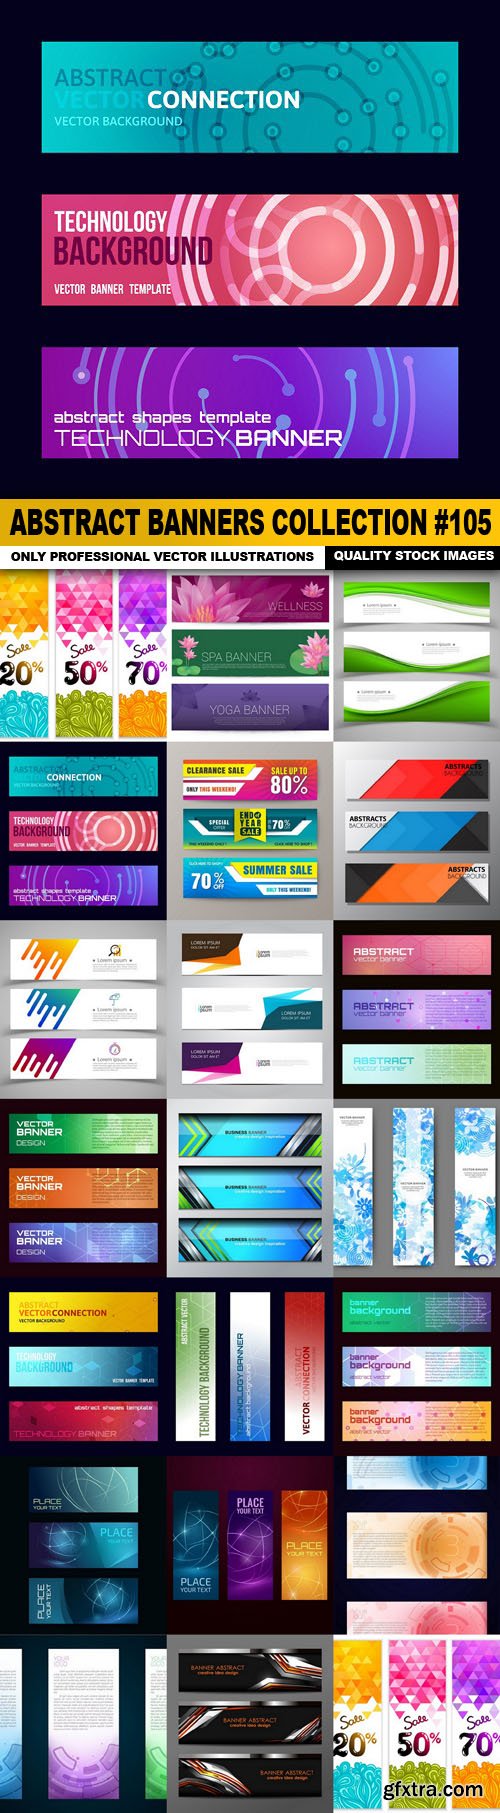 Abstract Banners Collection #105 - 20 Vectors